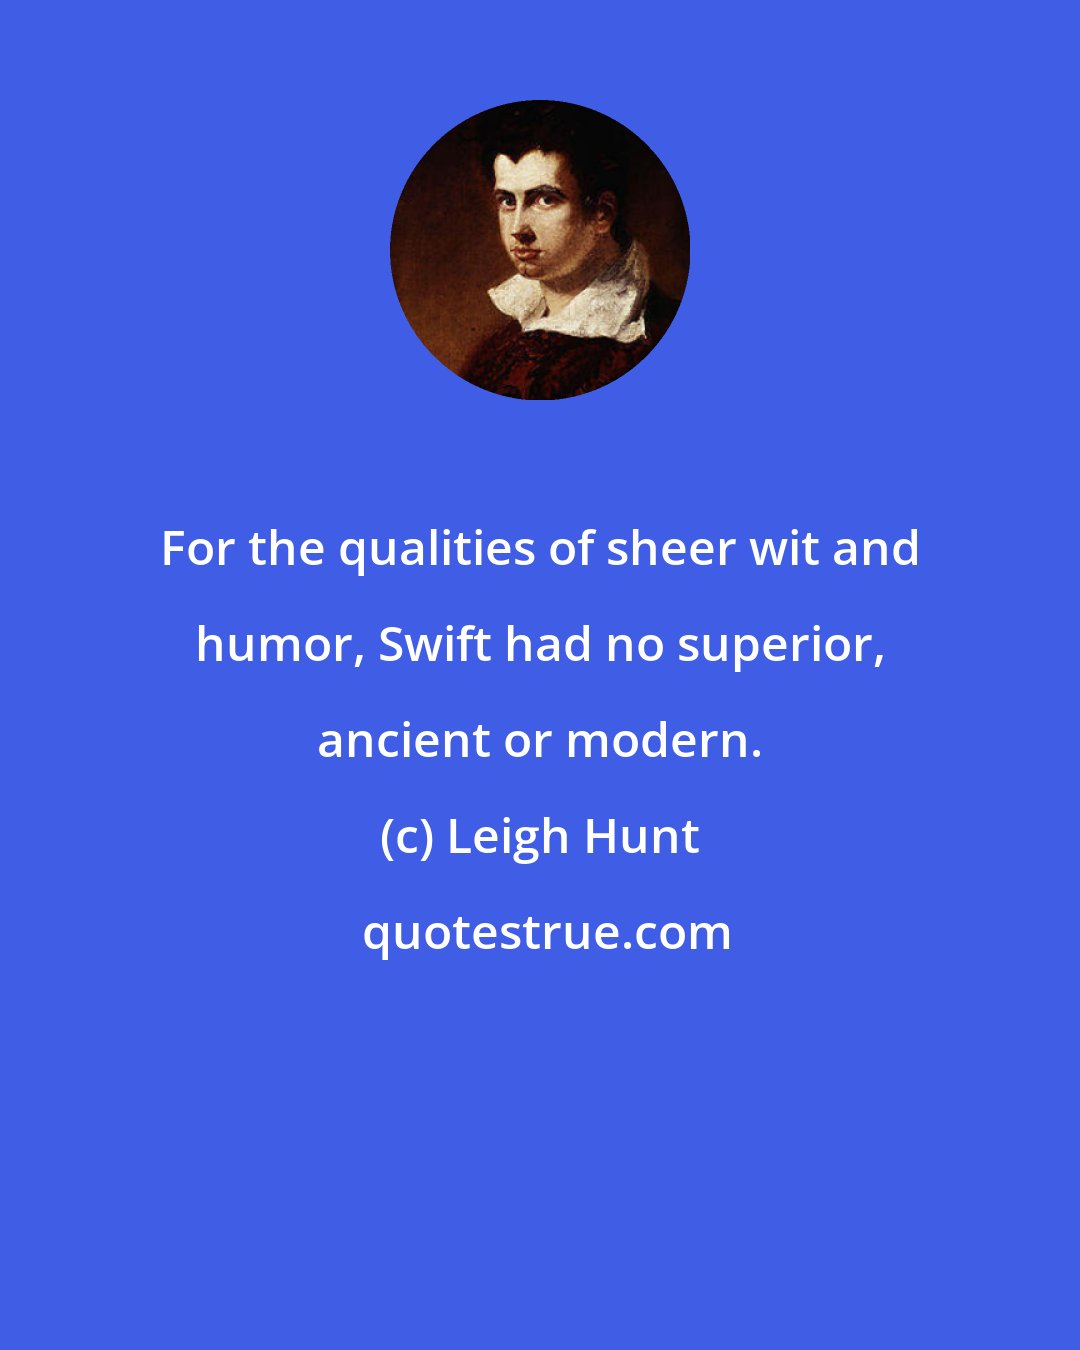 Leigh Hunt: For the qualities of sheer wit and humor, Swift had no superior, ancient or modern.